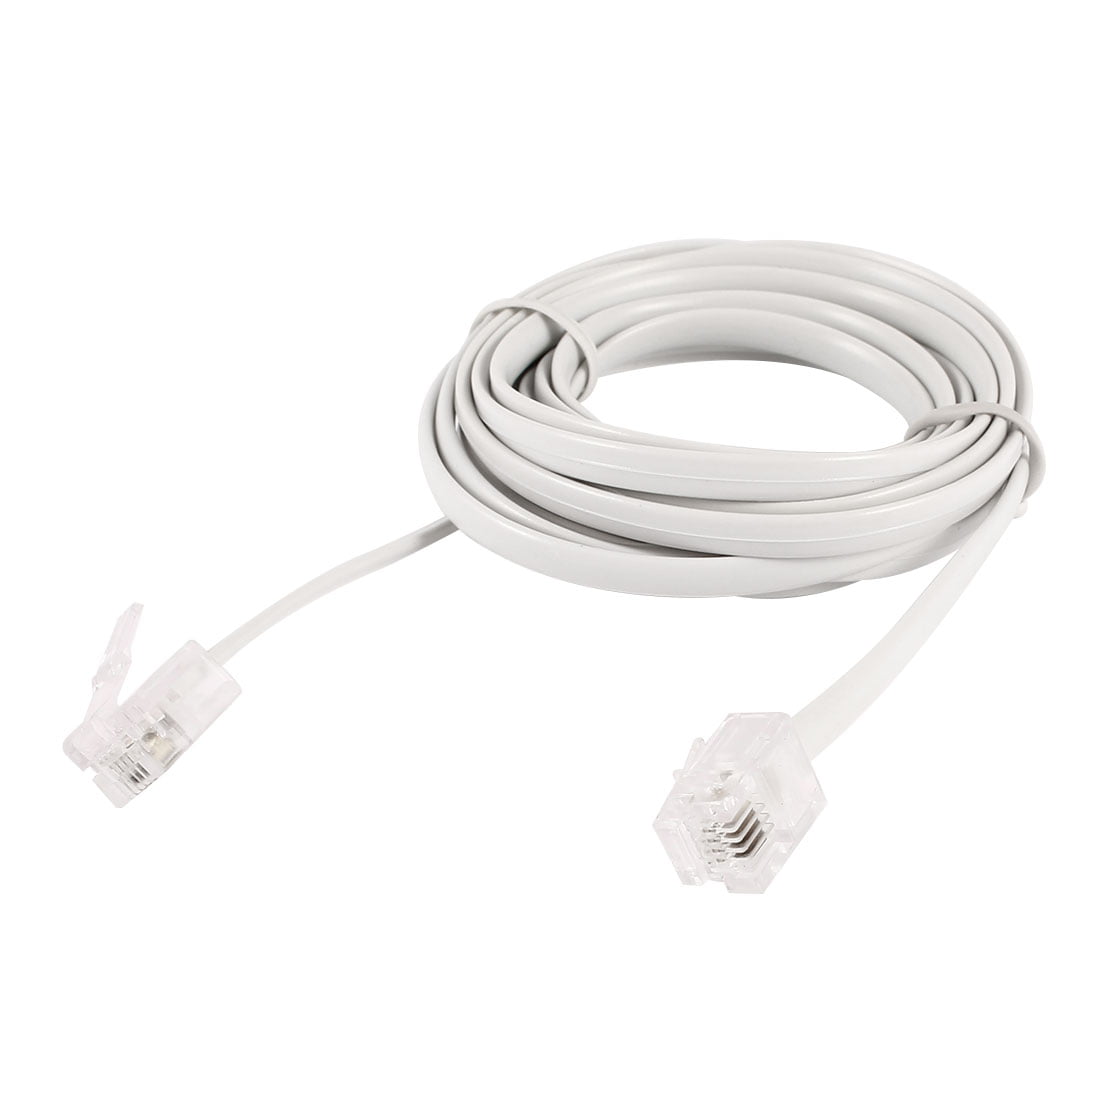 flexible 6ft 1.8M Male RJ9 Telephone Handset Phone Extension Cord Cable white 